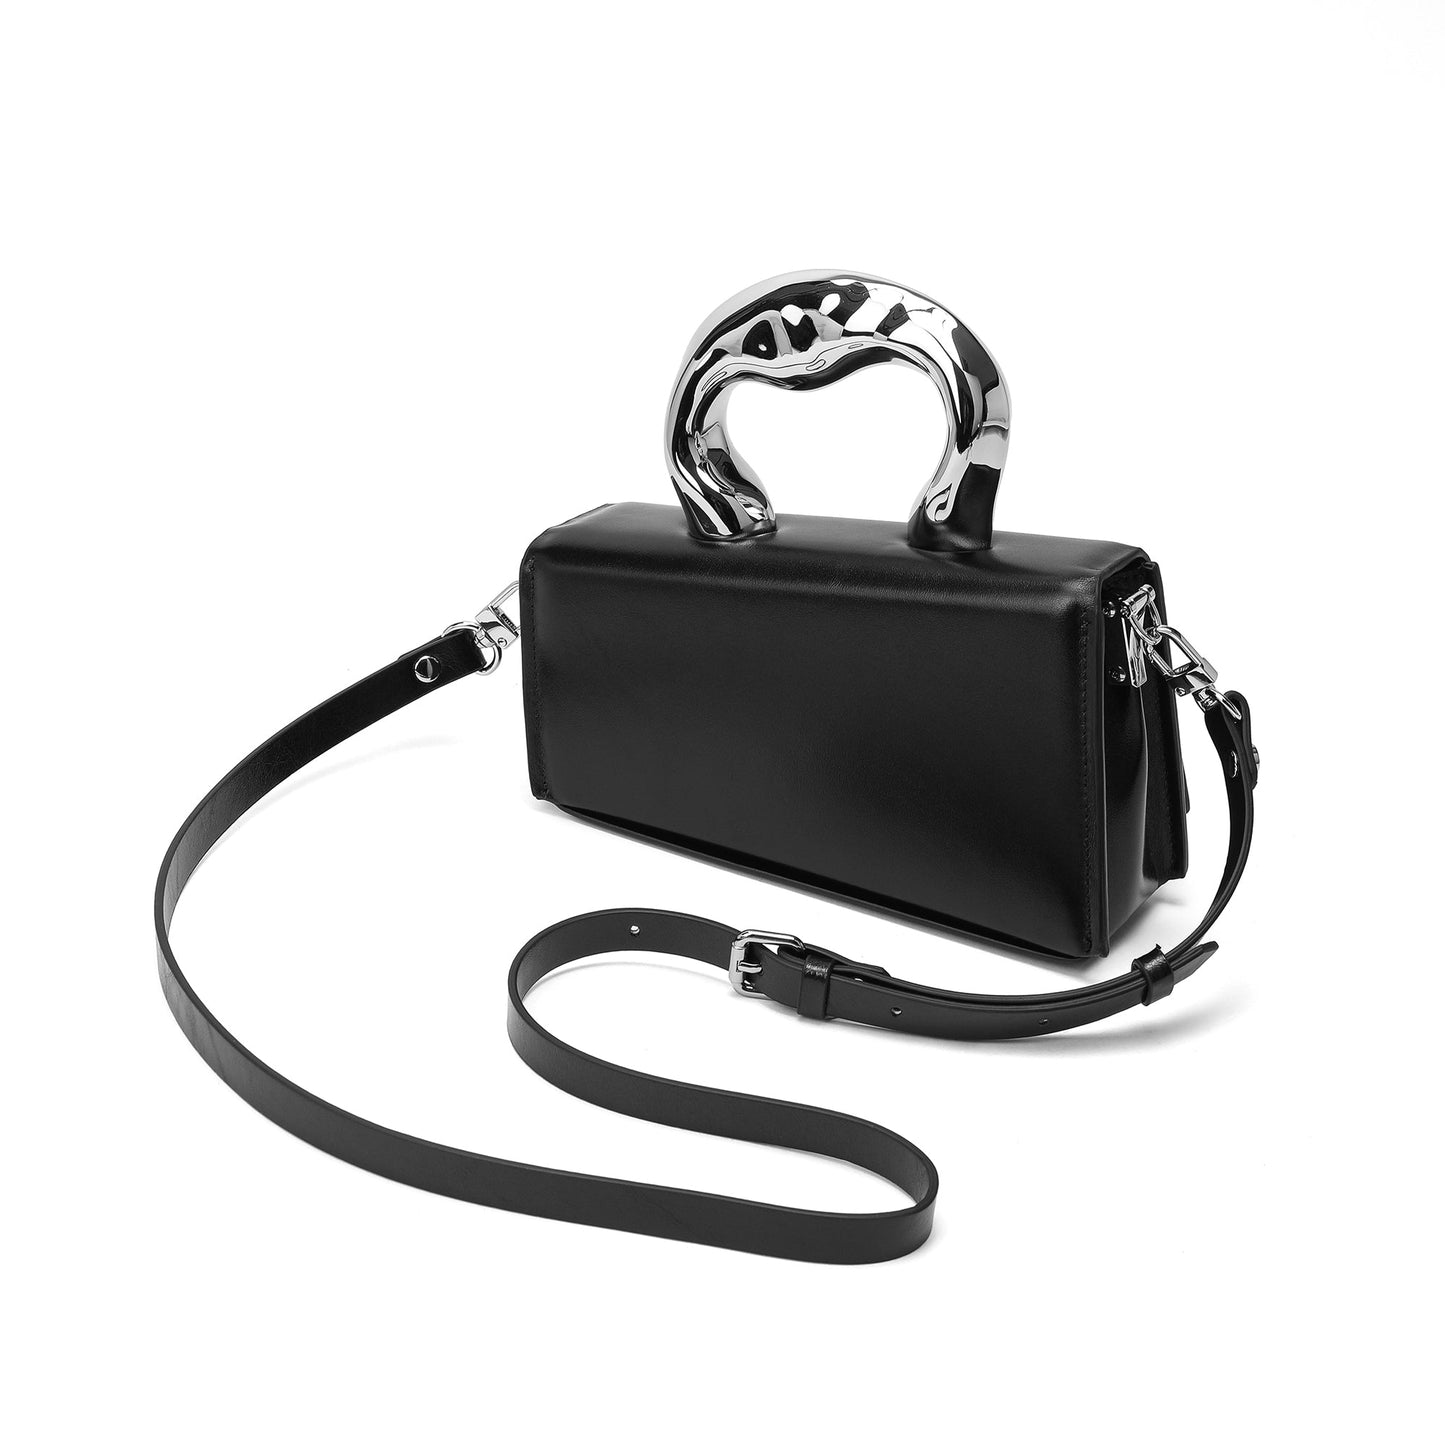 Smooth Leather Silver Handle bag # 2309